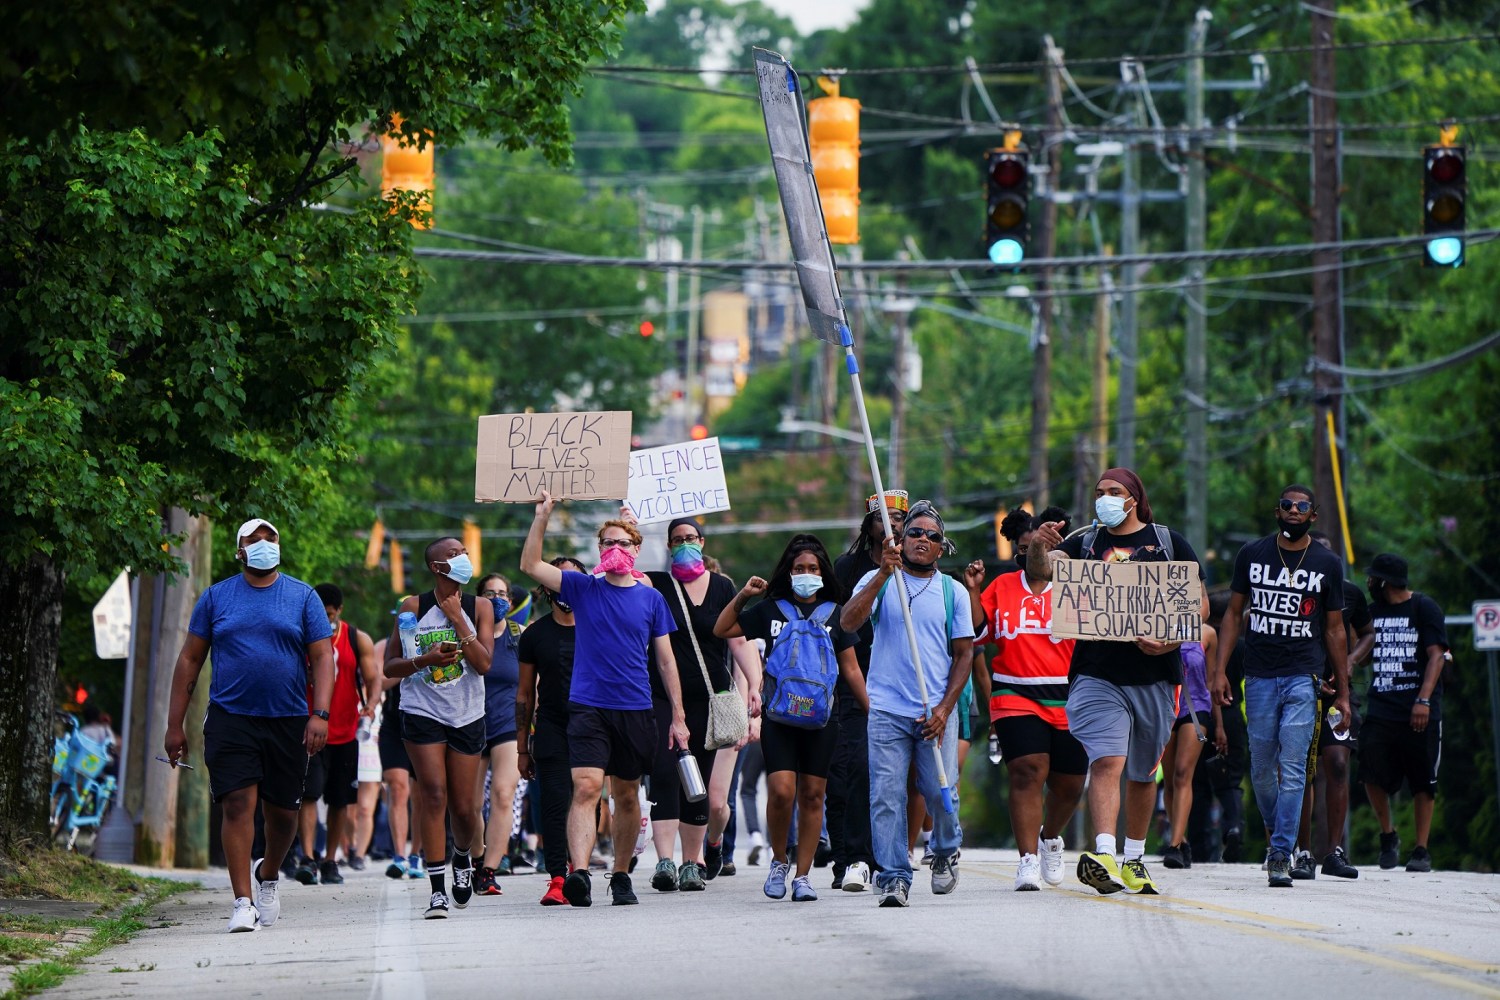 People take part in an event to mark Juneteenth, which commemorates the end of slavery in Texas, two years after the 1863 Emancipation Proclamation freed slaves elsewhere in the United States, amid nationwide protests against racial inequality, in Atlanta, Georgia, U.S. June 19, 2020. REUTERS/Elijah Nouvelage